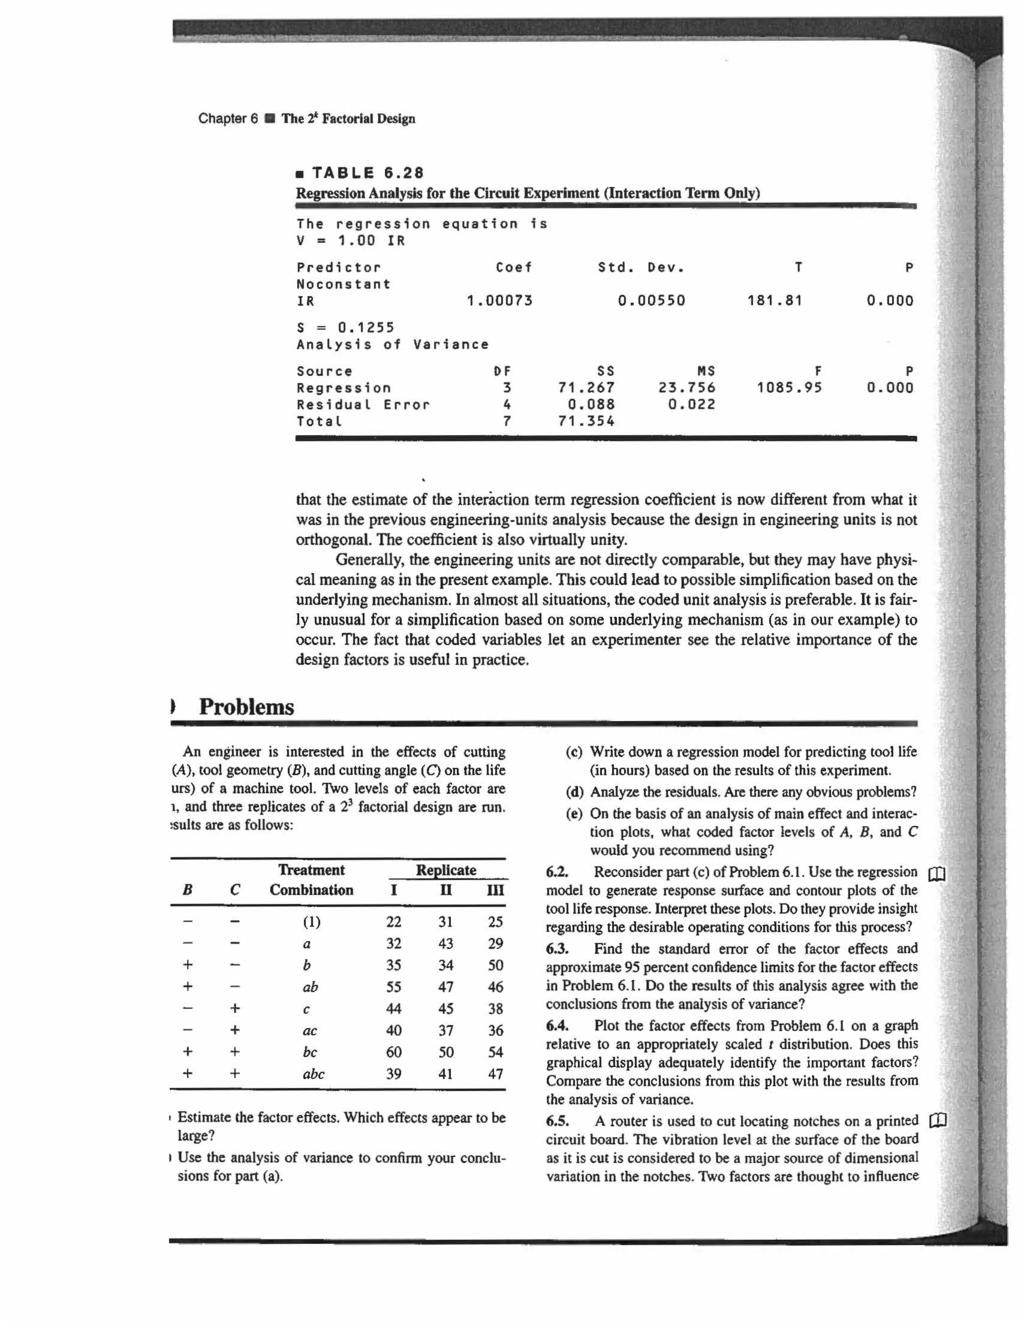 Chapter 6 The 1:' Factorial Design TABLE 6.28 Regression Analysis for the Circuit Experiment (Interaction Term Only) The regression equation is V = 1.00 IR Predictor Coef Noconstant IR 1.00073 Std.